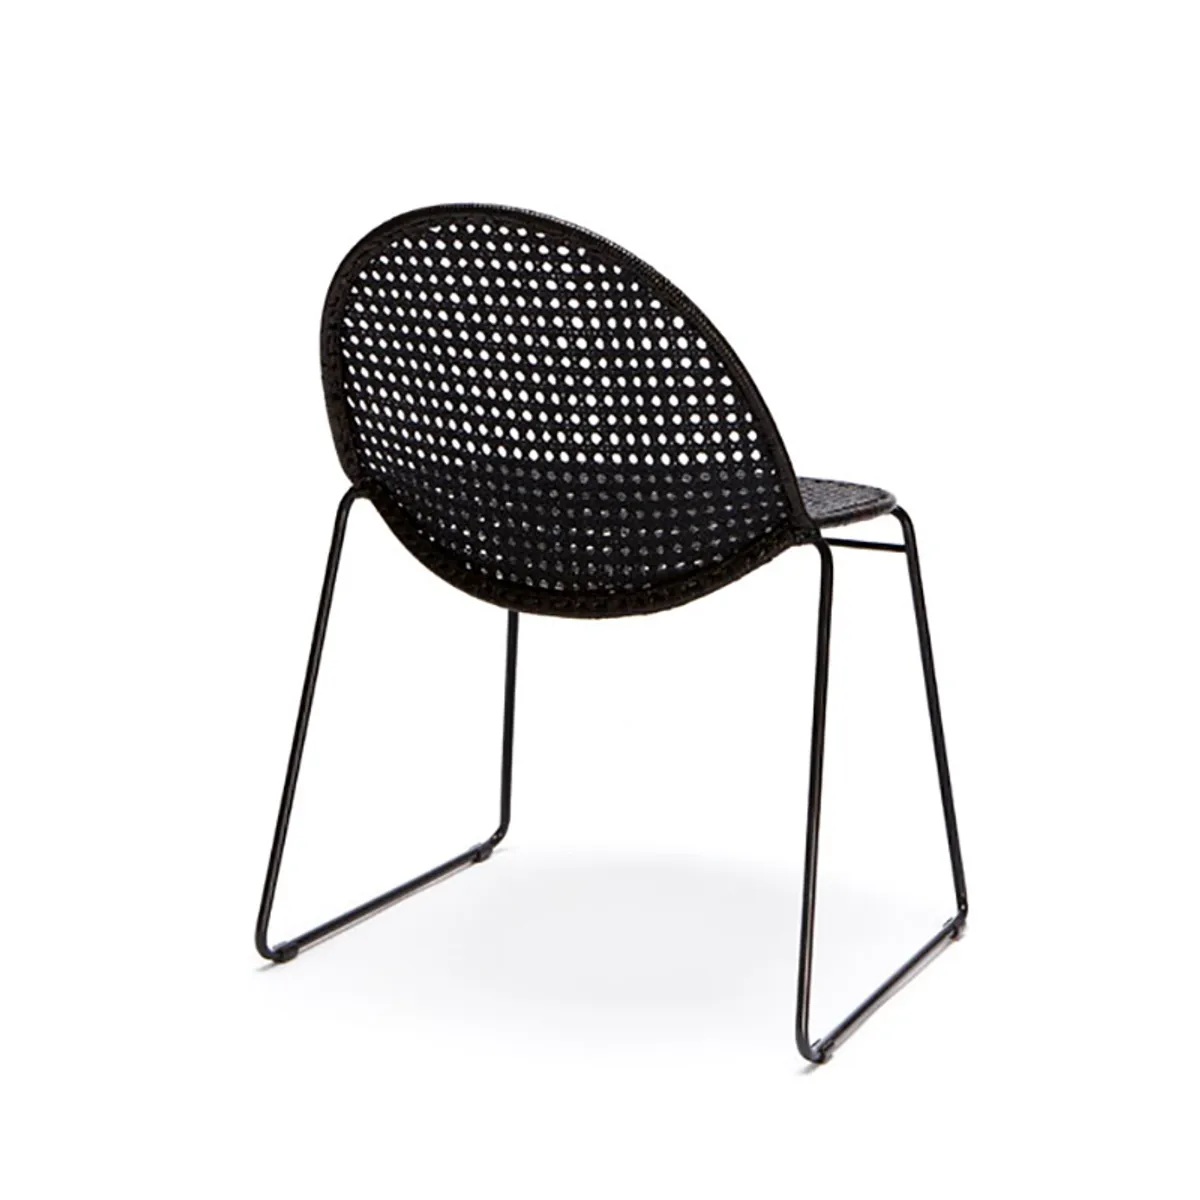 Percolator Side Chair Cane With Sled Legs For Cafes And Restaurants